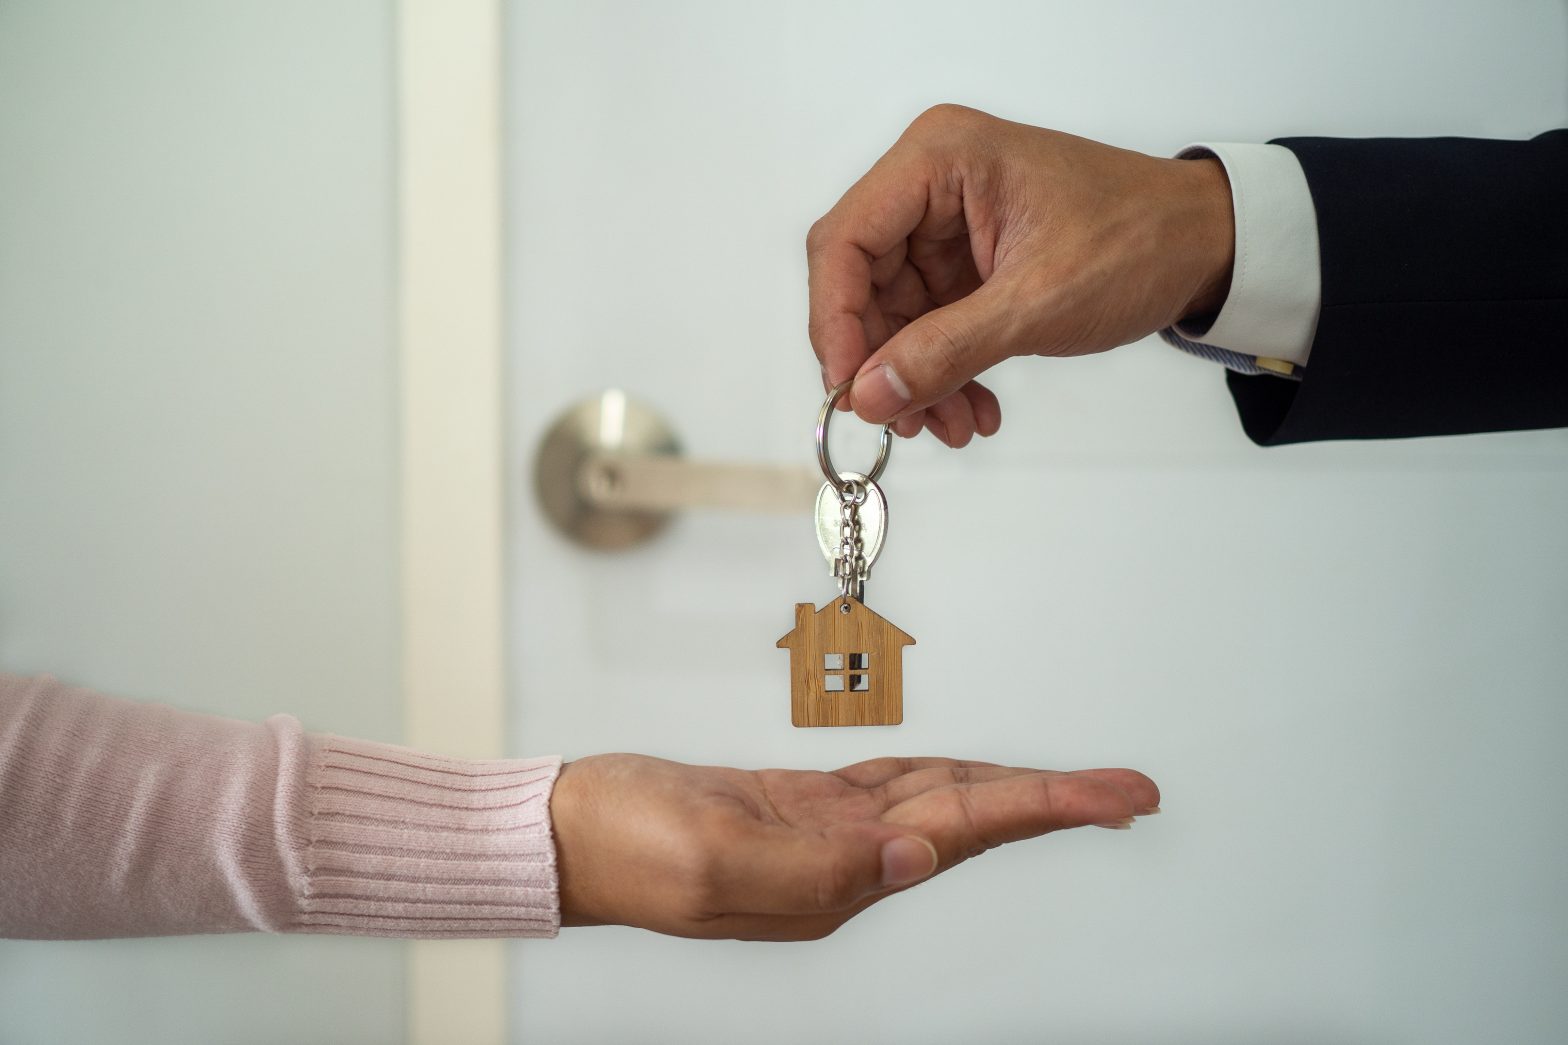 The business man in the suit giving a house key to the woman's hand. Employees sending a new home keys to buyers. concept of Landlords or buying and selling real estate rentals